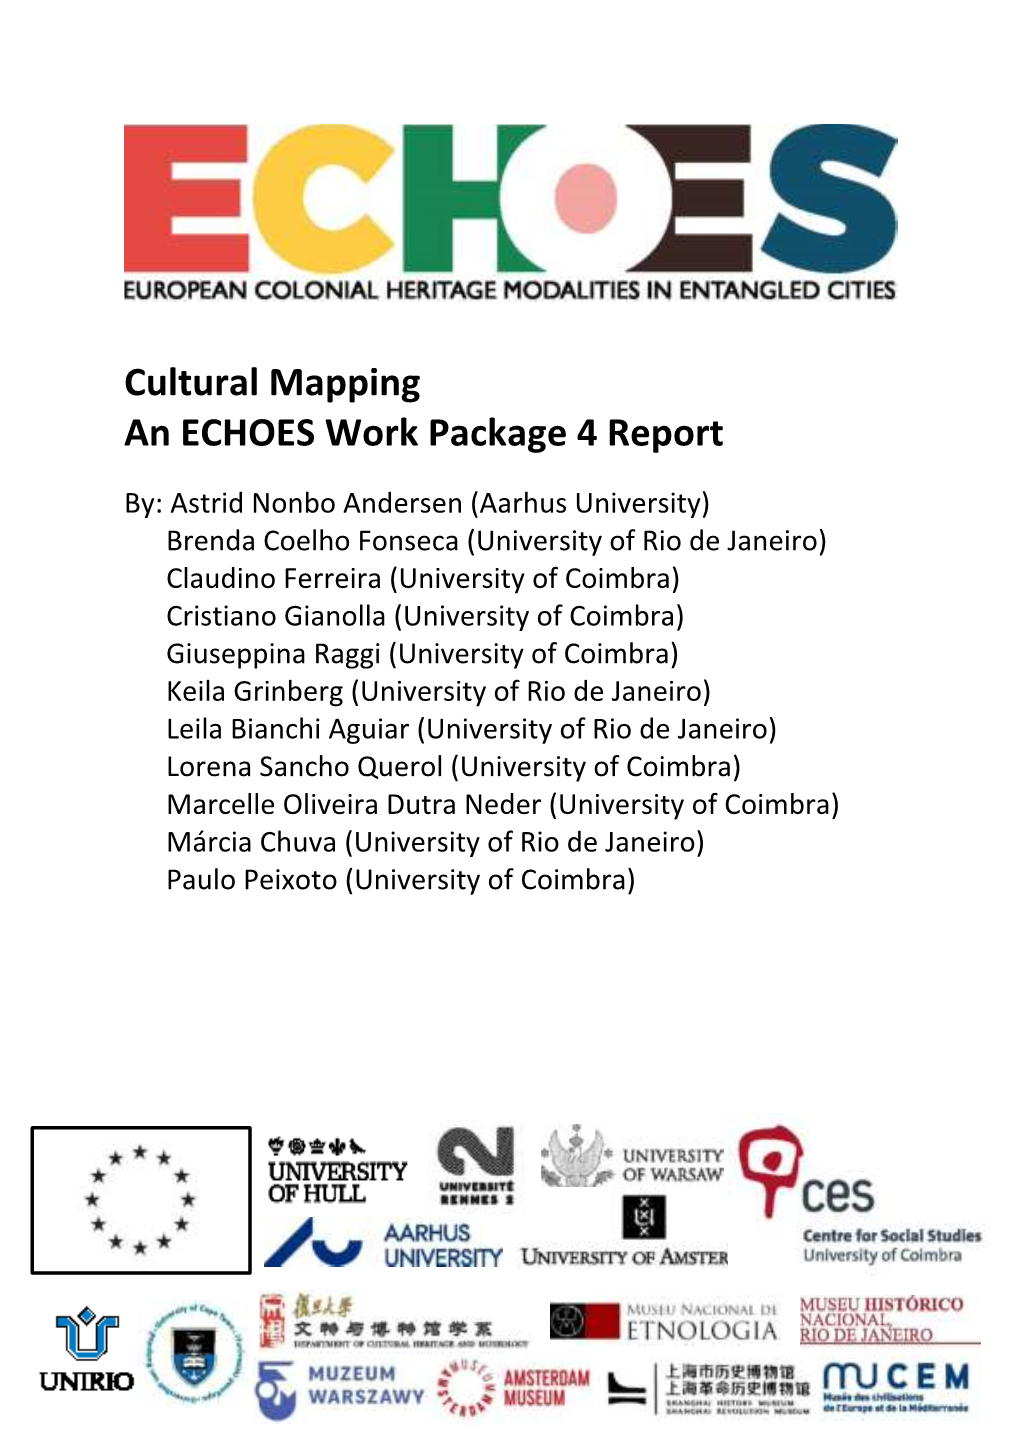 Cultural Mapping an ECHOES Work Package 4 Report